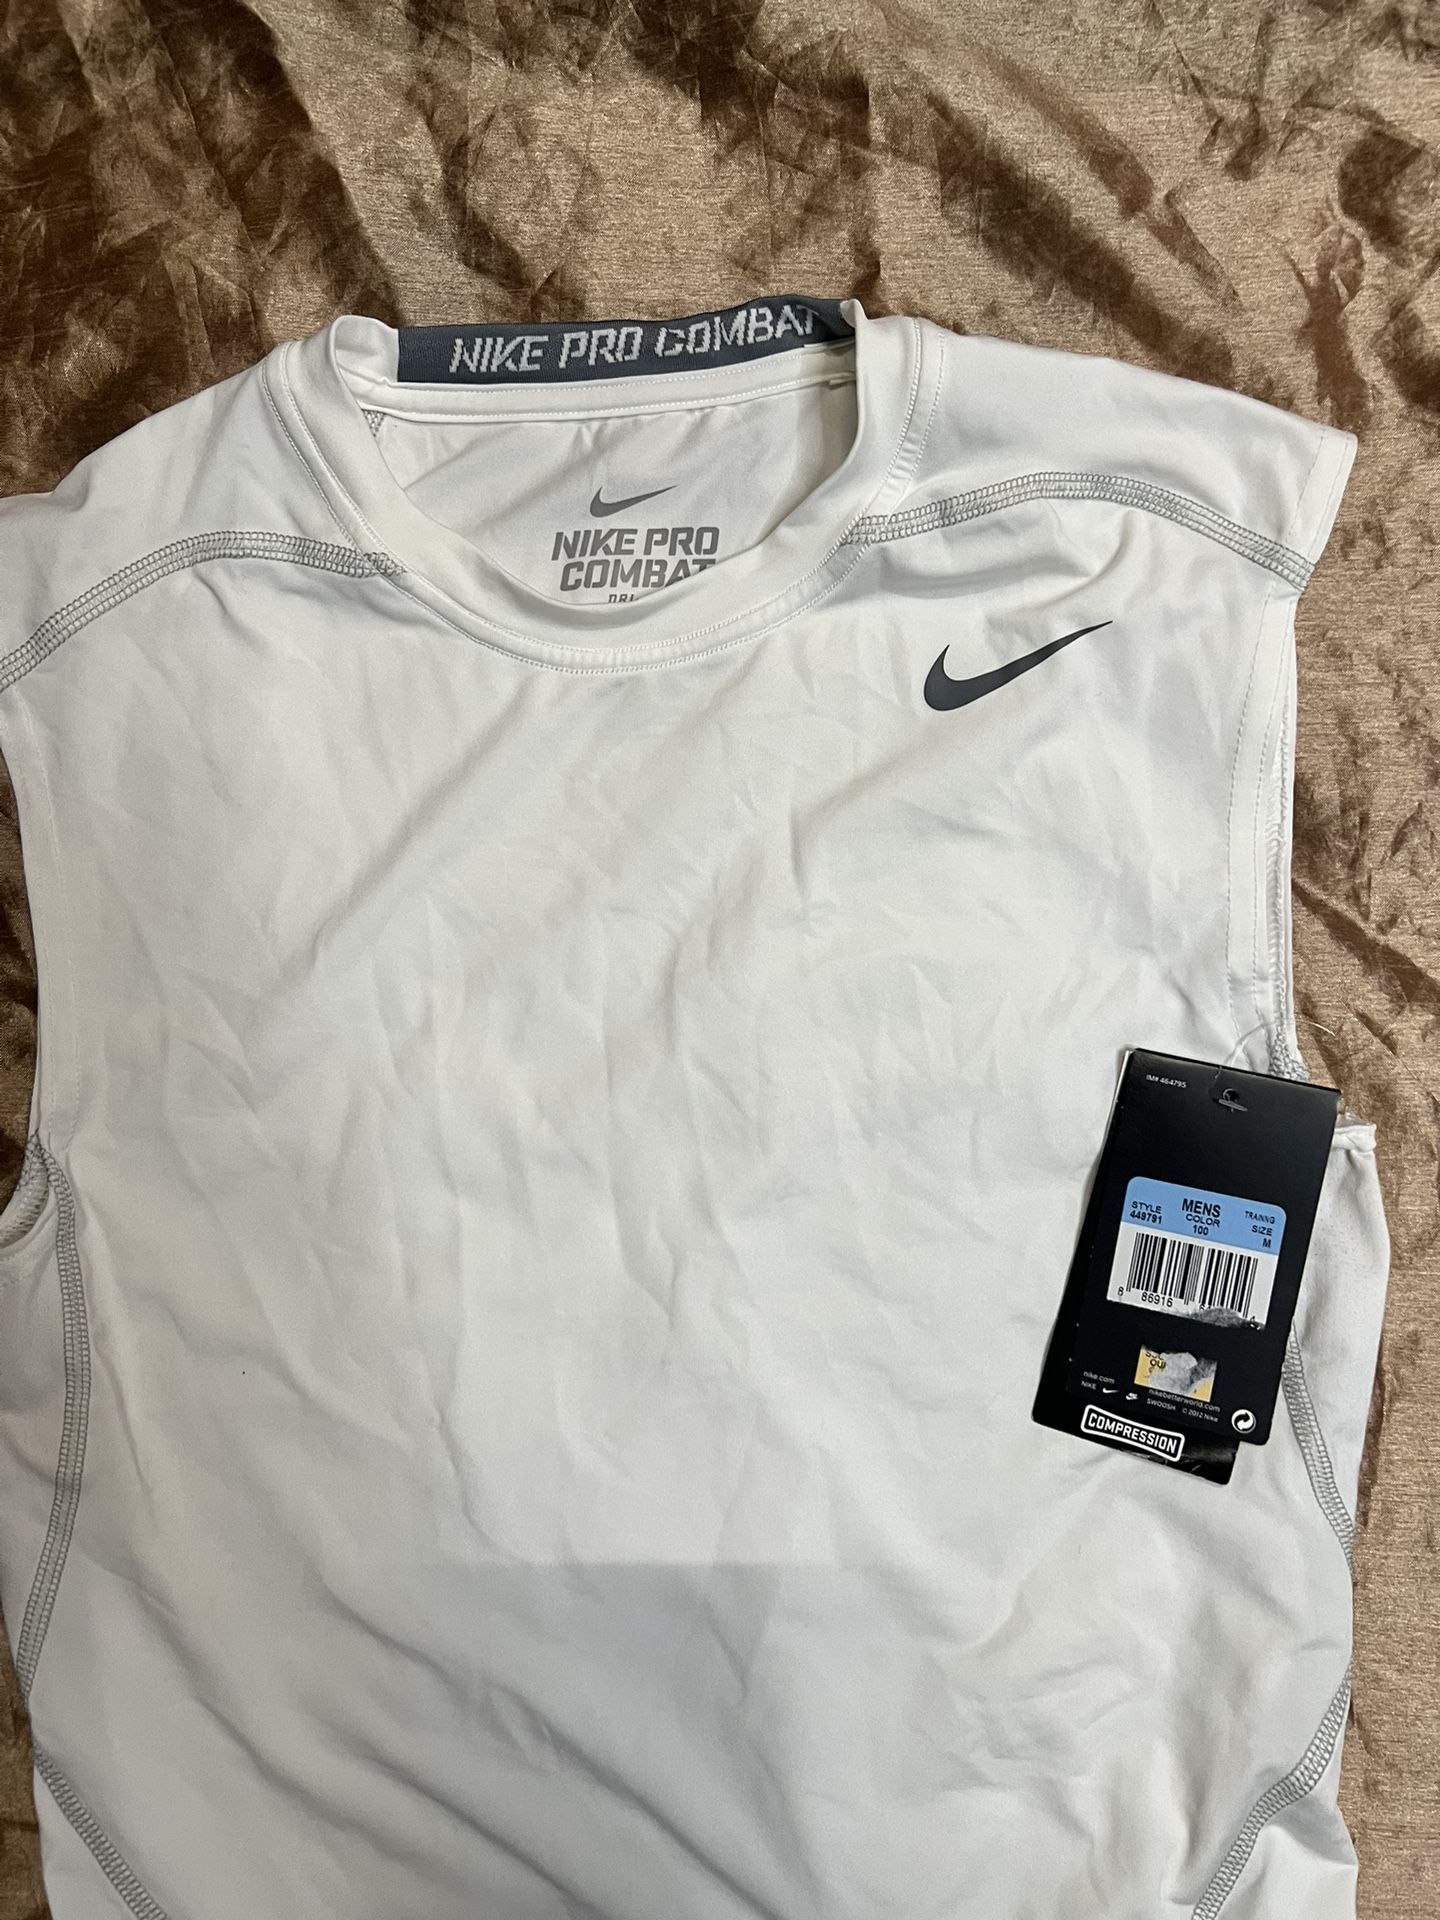 Nike Pro Combat Compression Tank Top for Sale in Whittier, CA - OfferUp